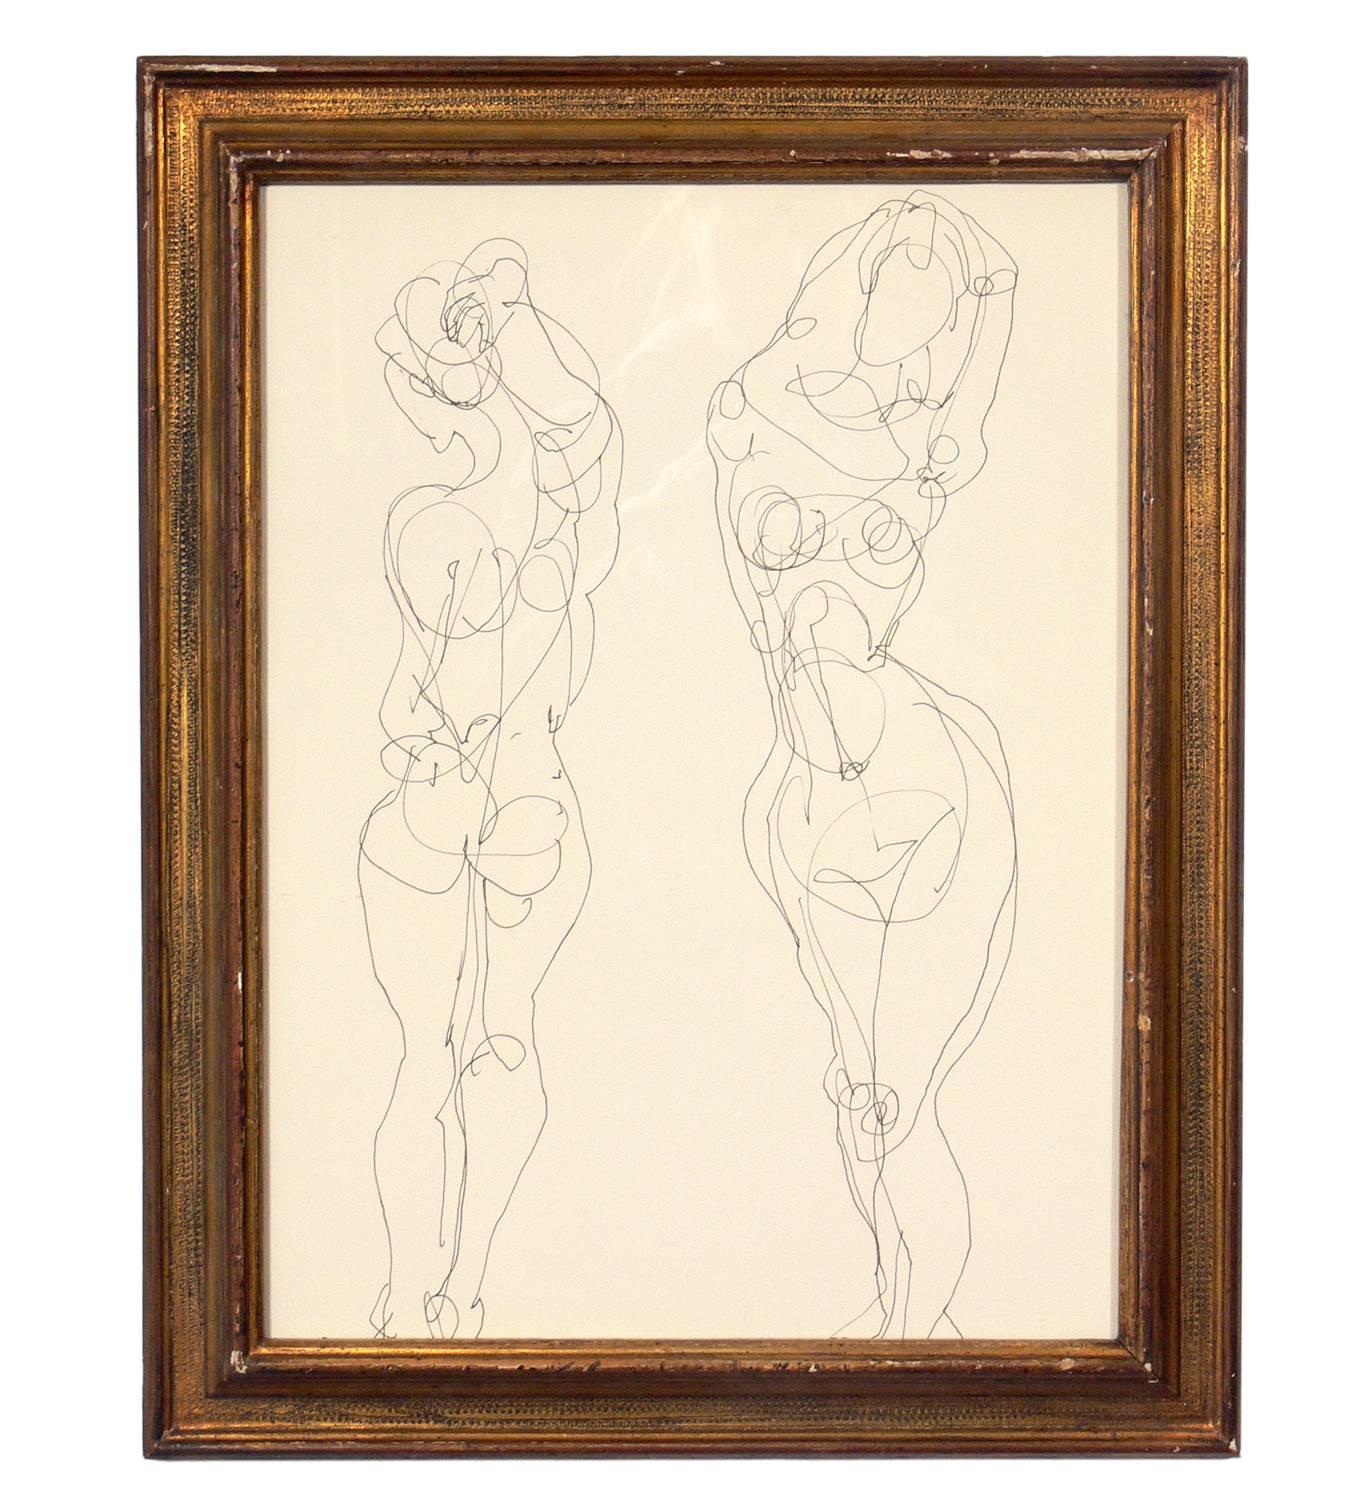 Selection of Figural Line Drawings or Gallery Wall by Miriam Kubach, American, circa 1950s. Please see our other 1stdibs listings for more Miriam Kubach works. These works, from left to right, measure:
1) 16.75